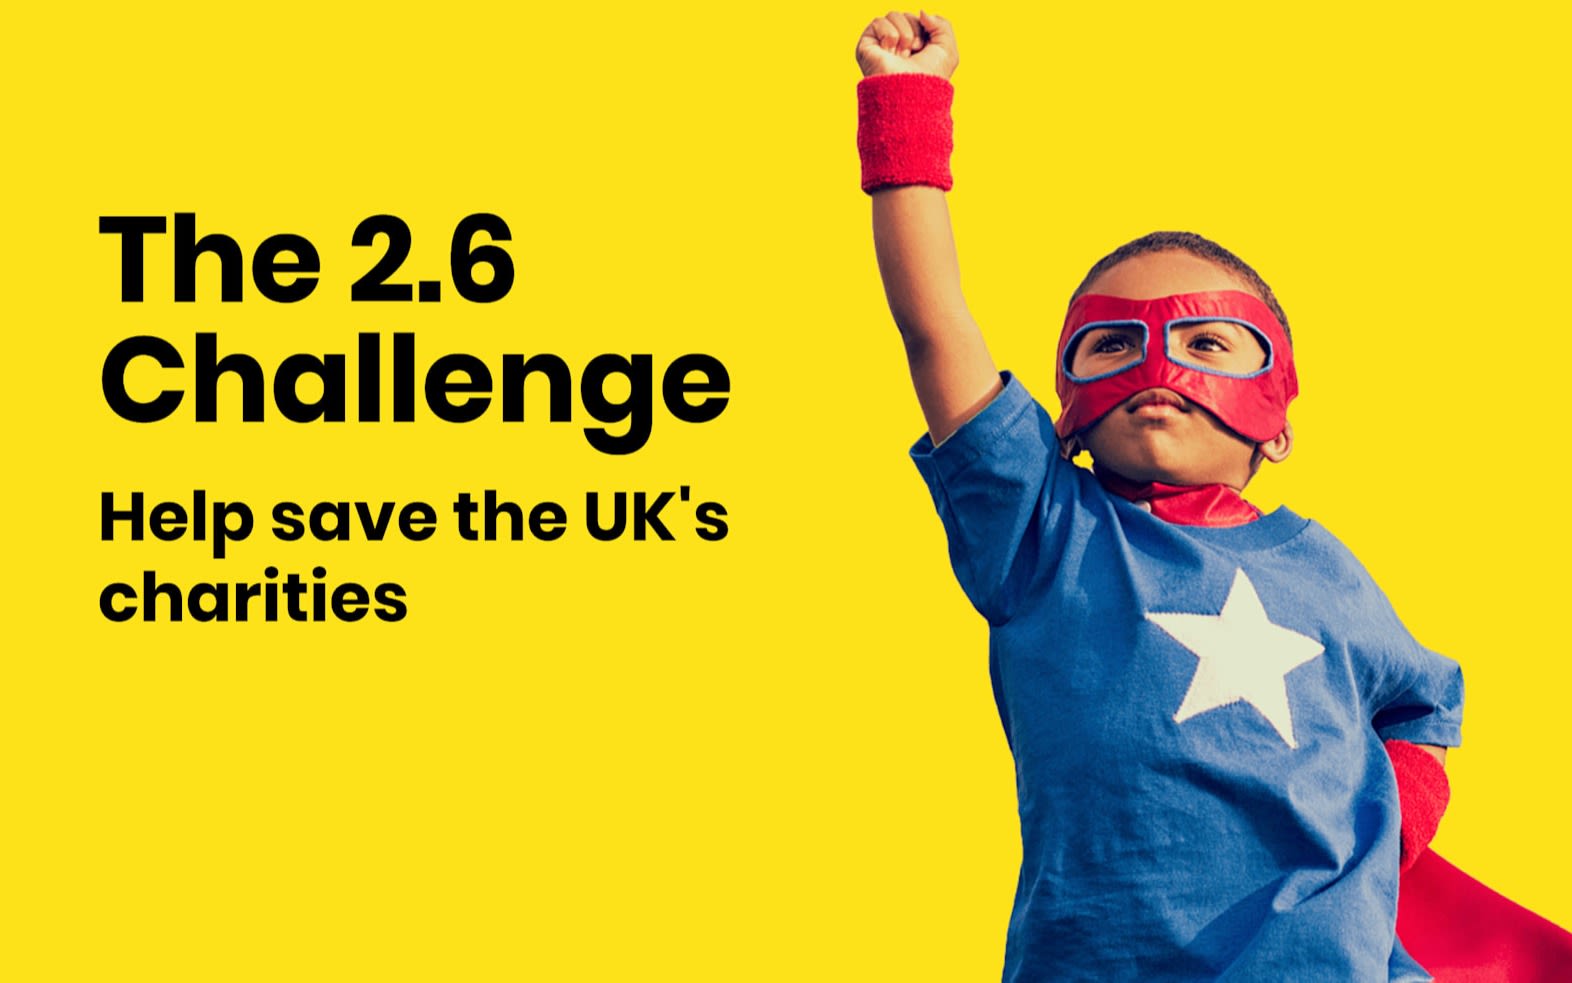 Image of a young boy in a superhero mask and cape on a yellow background.  "The 2.6 Challenge Help save UK Charities" is written in black